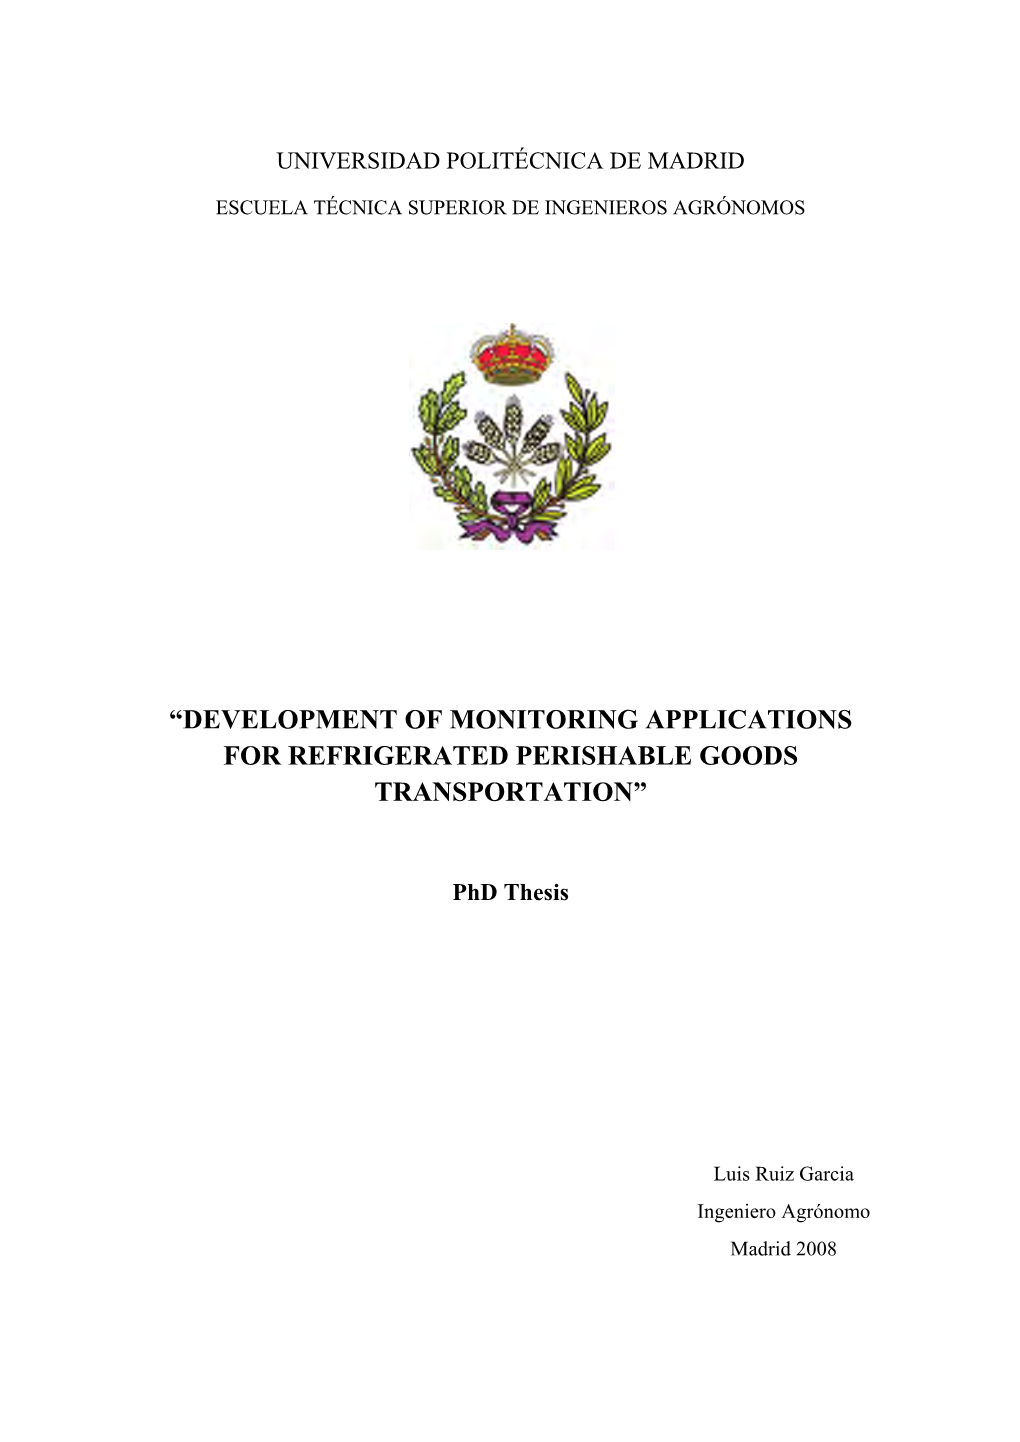 Development of Monitoring Applications for Refrigerated Perishable Goods Transportation”